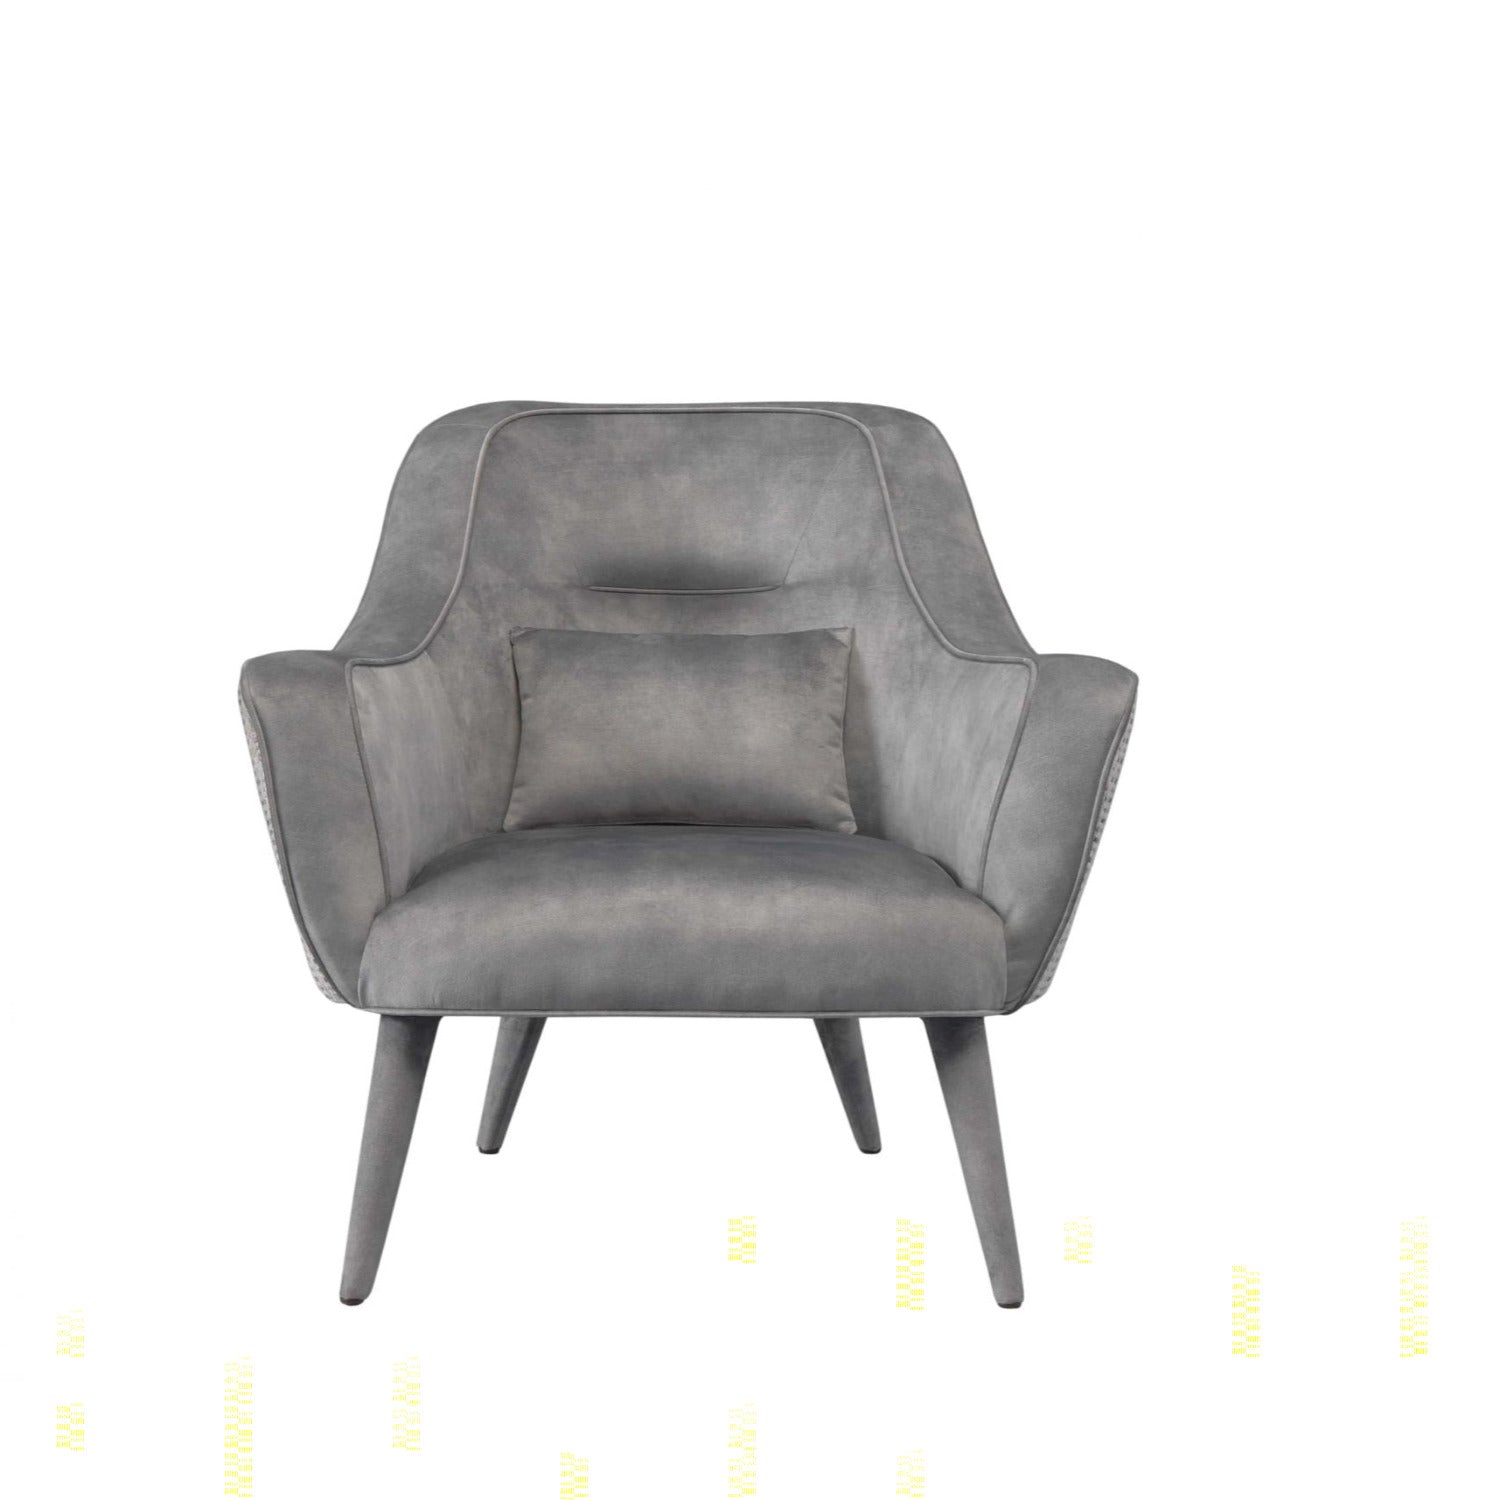 Upholstered armchair in luxury grey fabric and wooden legs